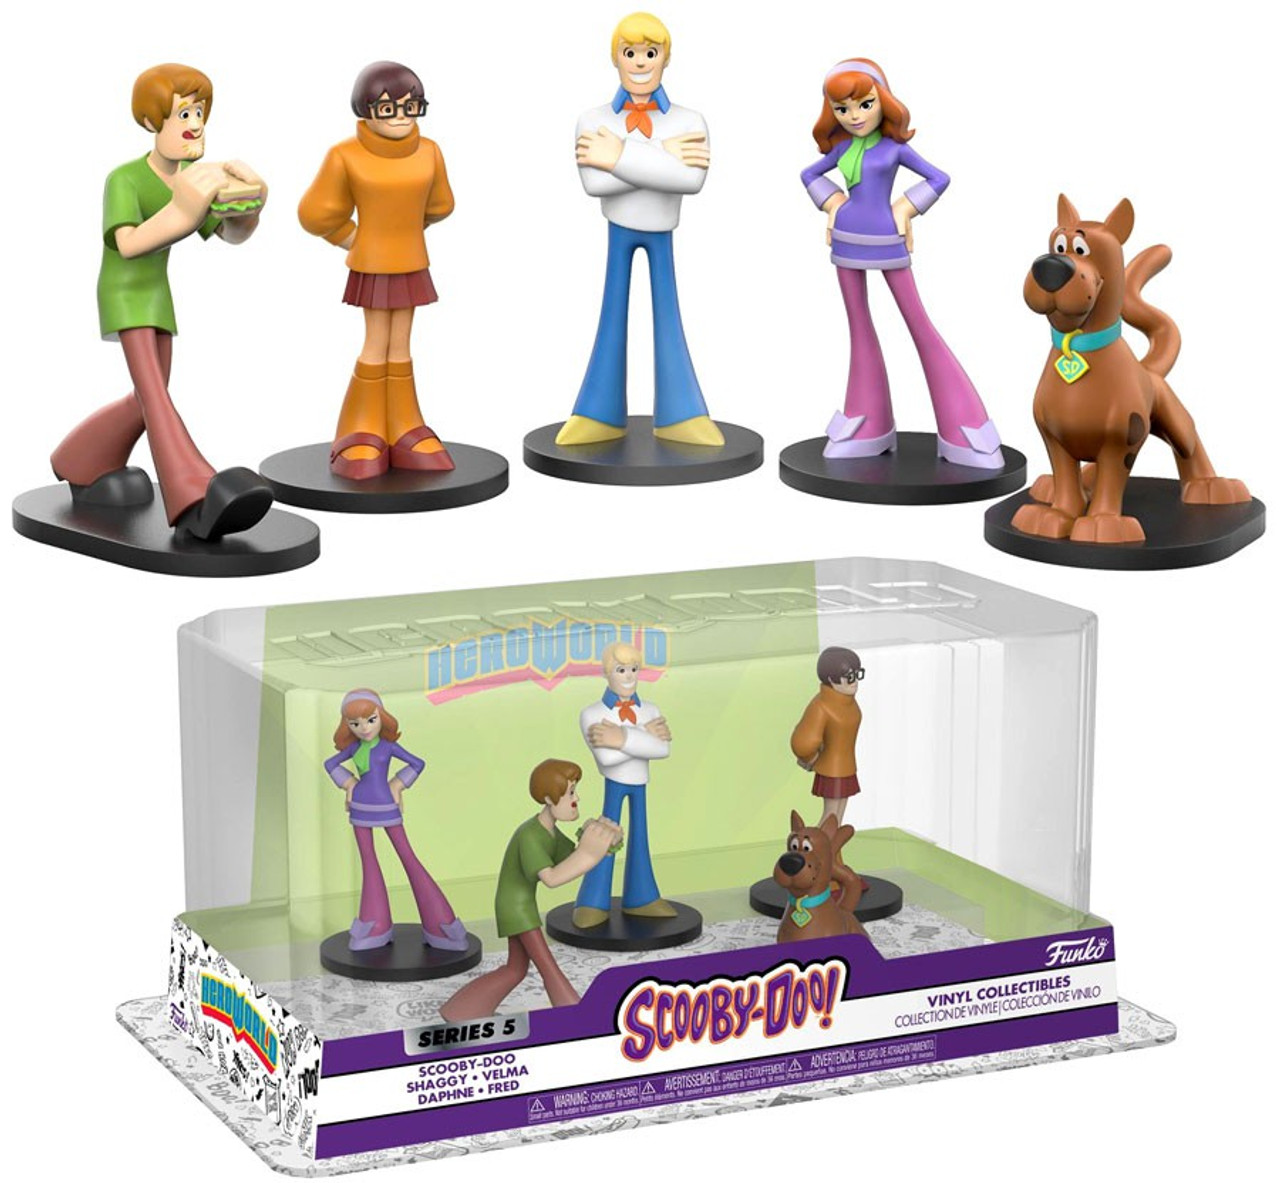 Funko Scooby Doo Hero World Series 5 Scooby Doo Shaggy Velma Daphne Fred Exclusive 4 Vinyl Figure 2 Pack Toywiz - neon green shirt goes with shaggy roblox